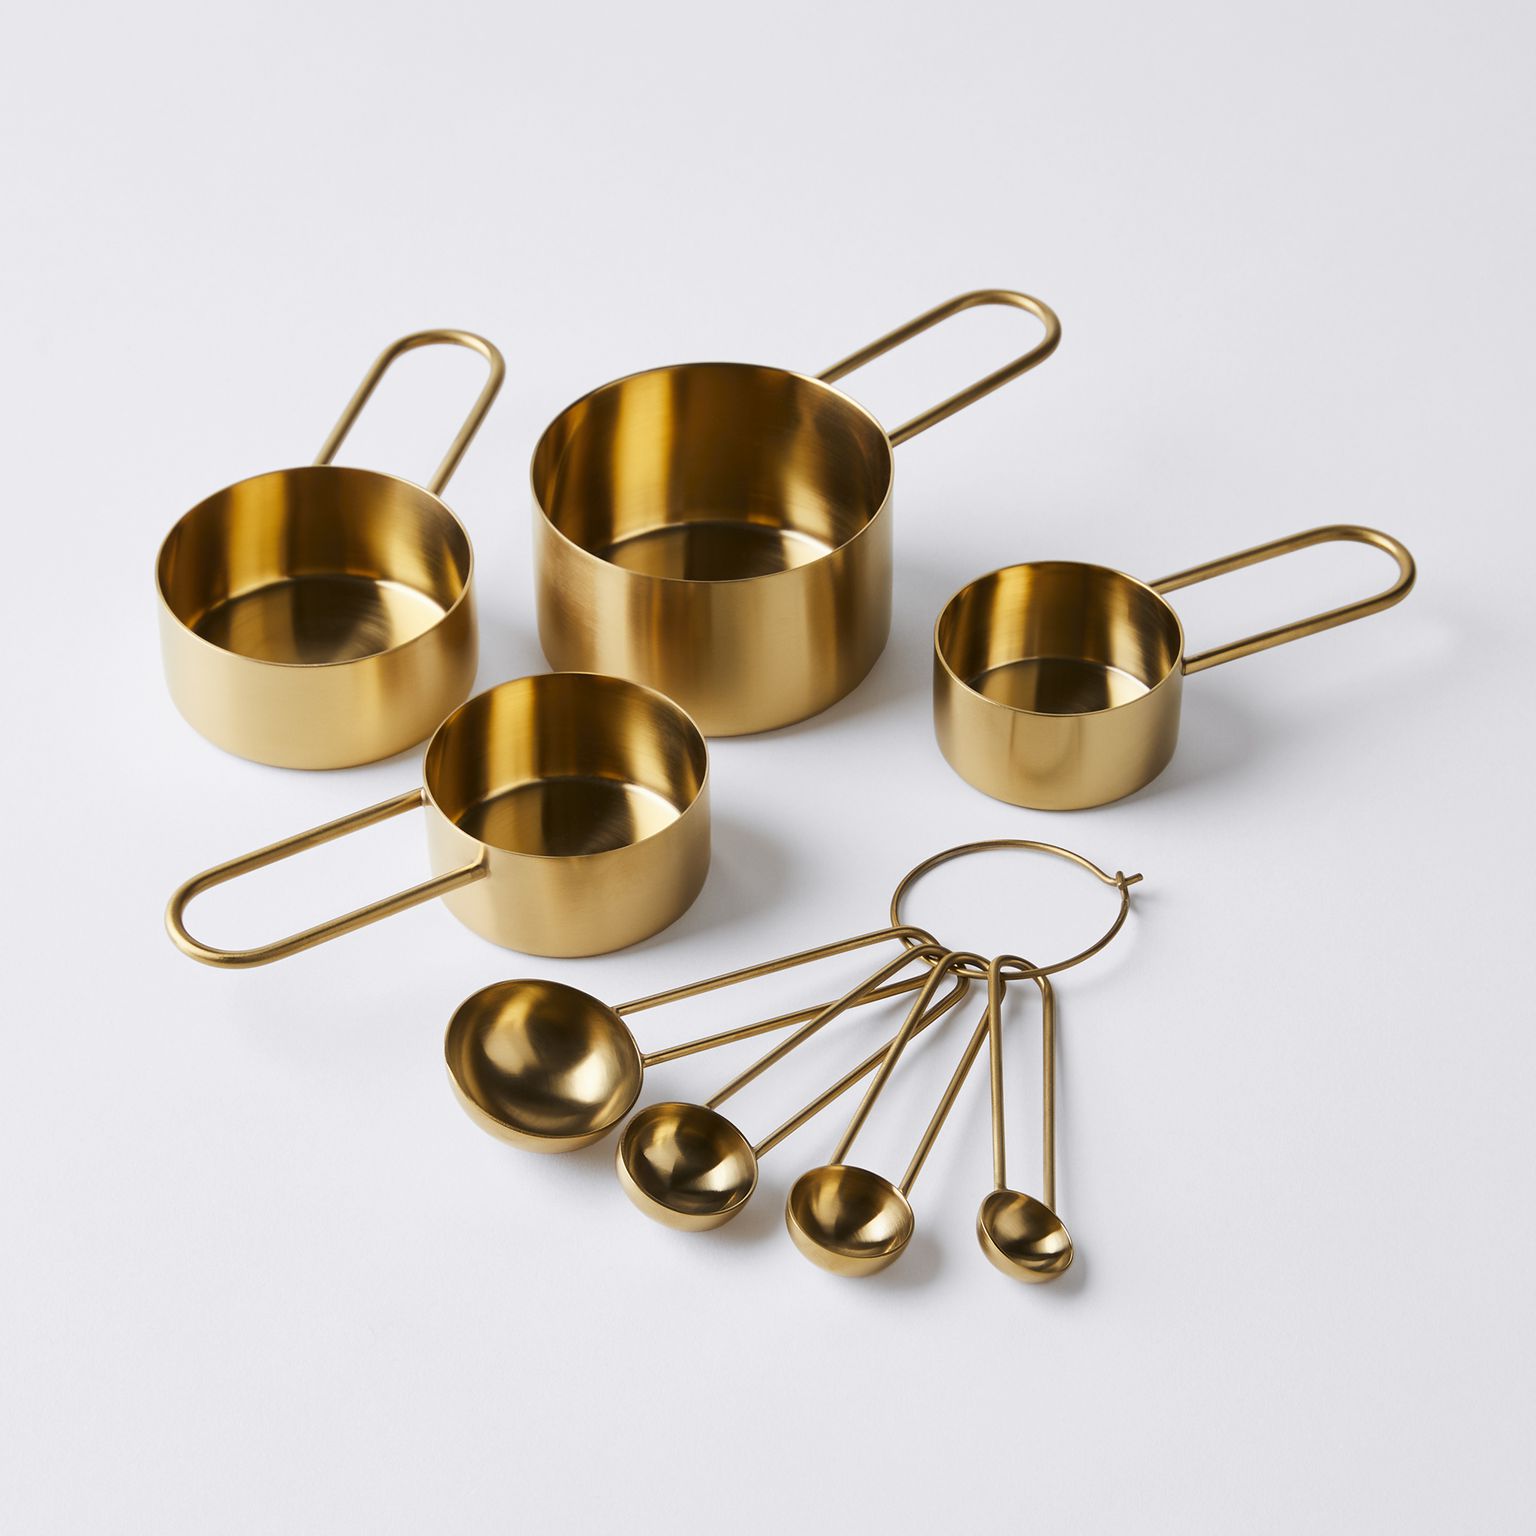 Gold Cooking Utensils with Gold Measuring Cups and Spoons Set - 23